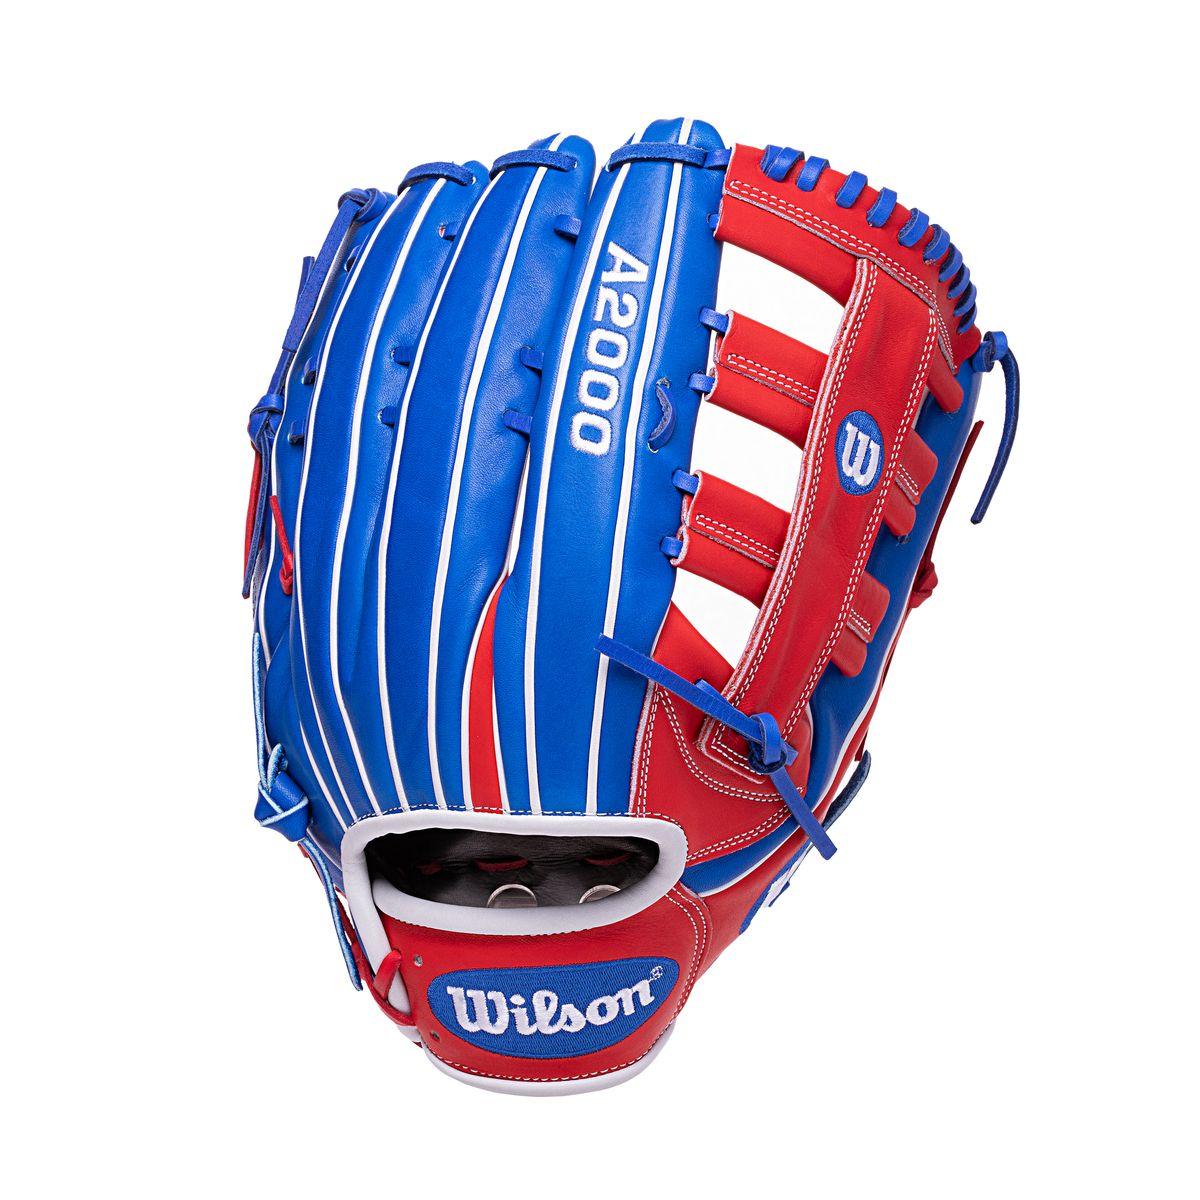 A2000 13" Senior Slowpitch Glove - Sports Excellence